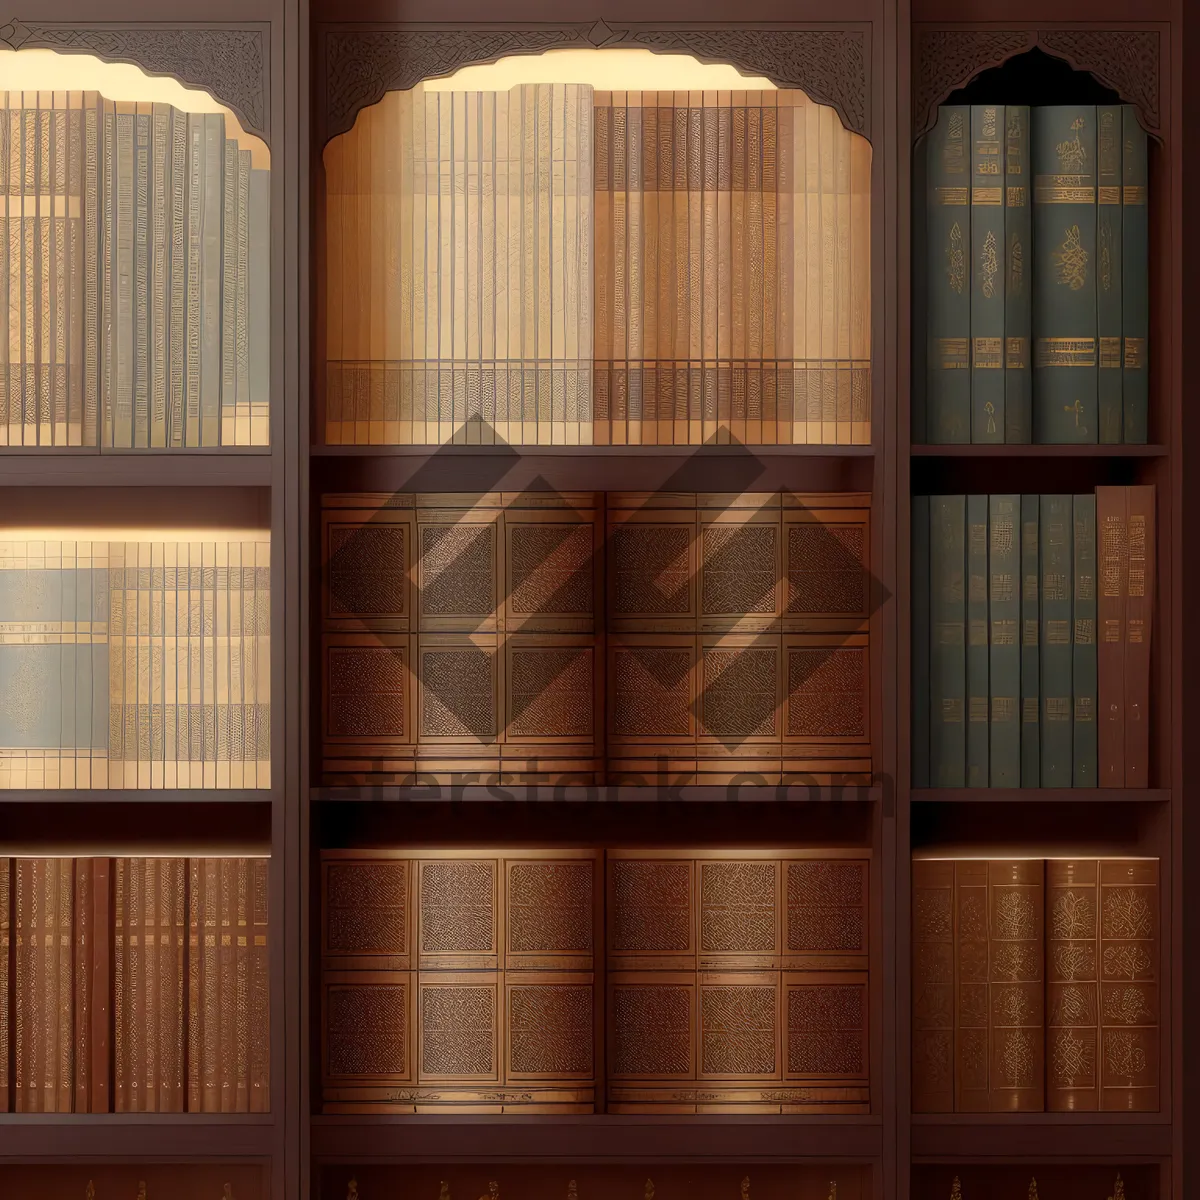 Picture of Home Library Shelf with Wooden Furnishings